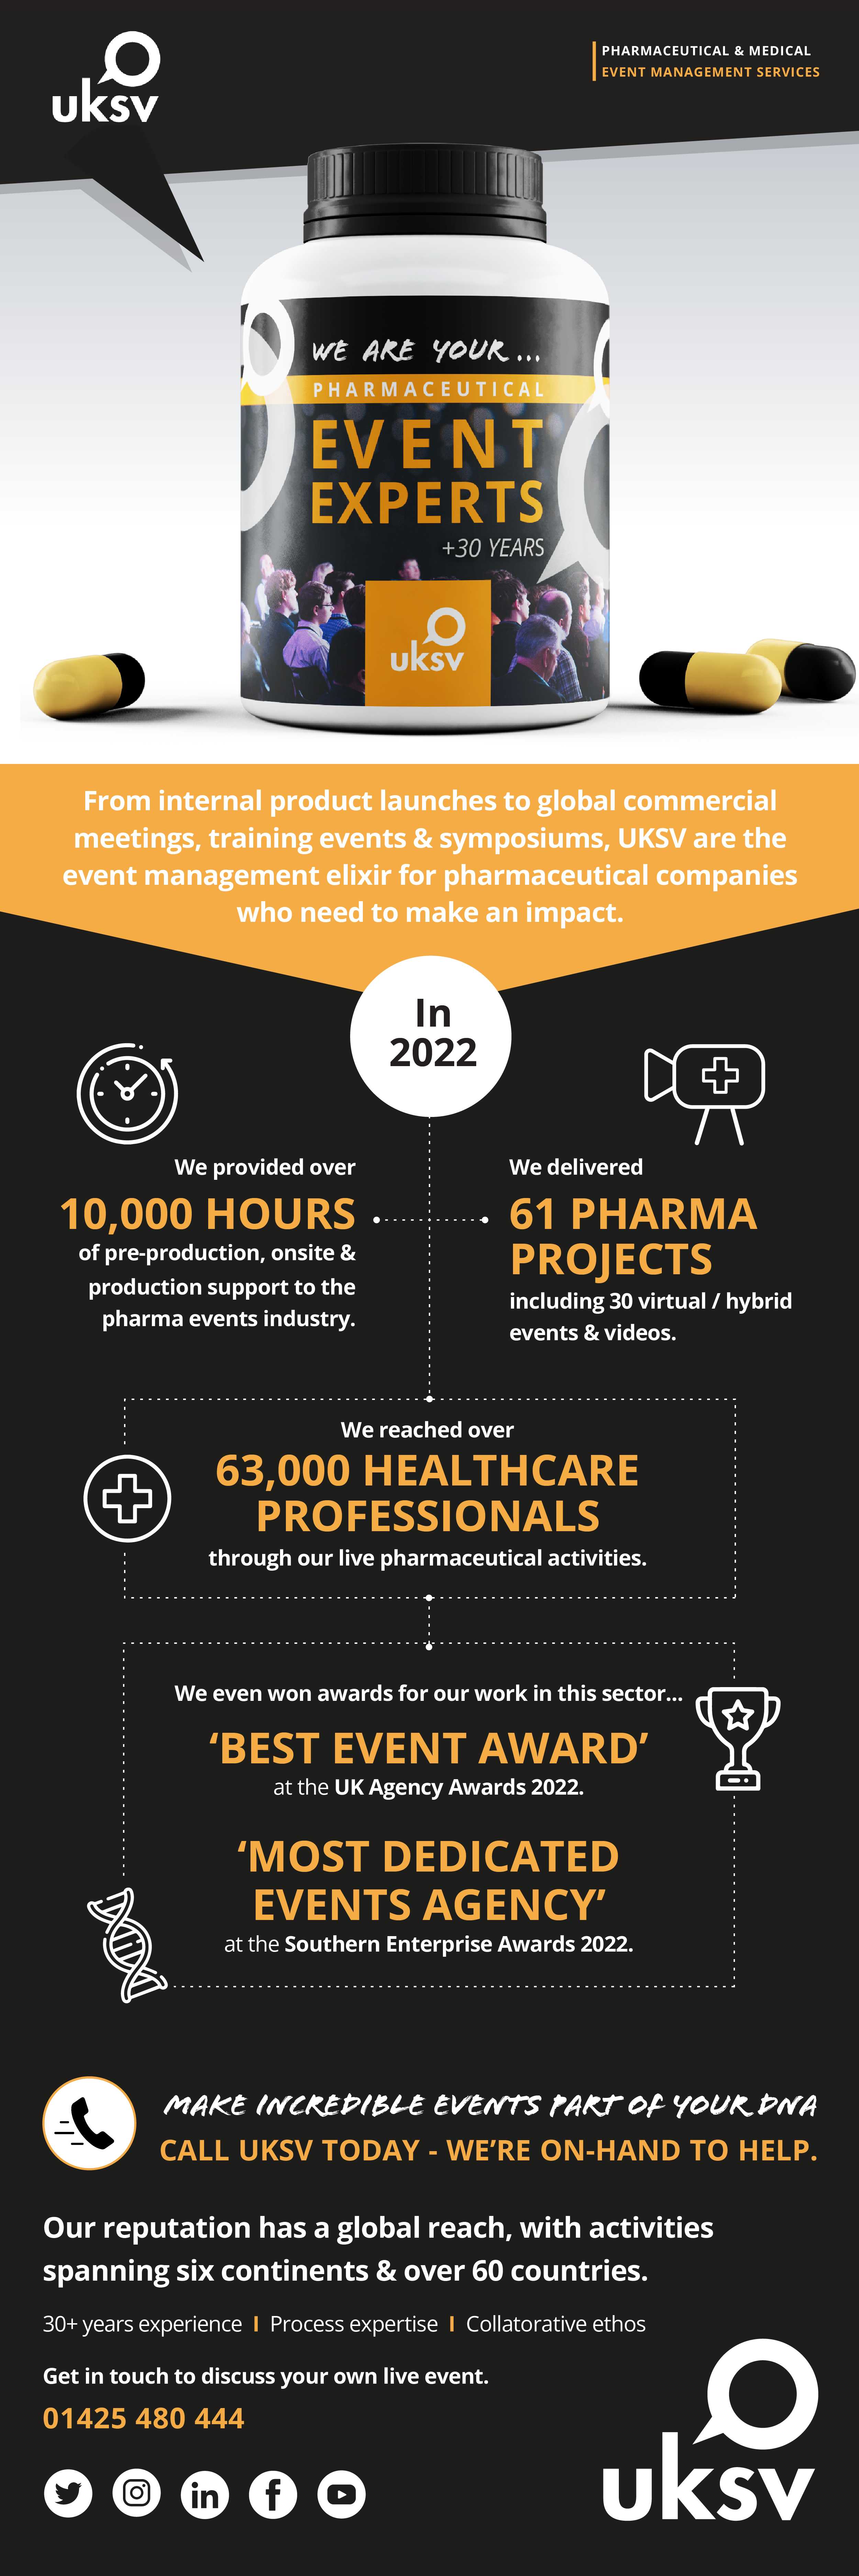 uksv pharmaceutical event experts infographic